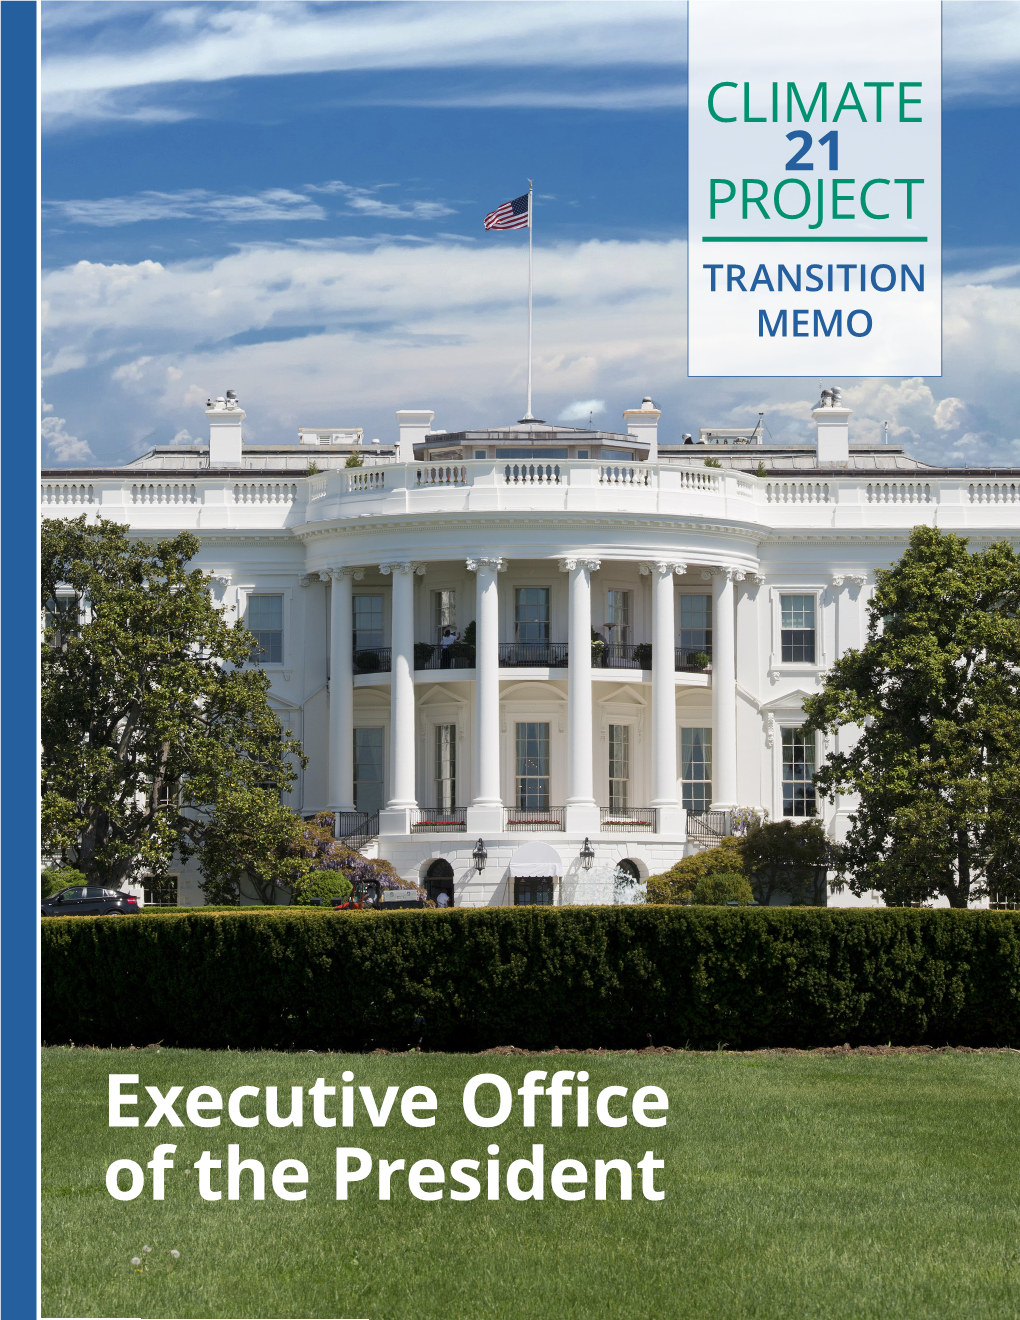 Executive Office of the President CLIMATE 21 PROJECT Transition Memo Executive Office of the President